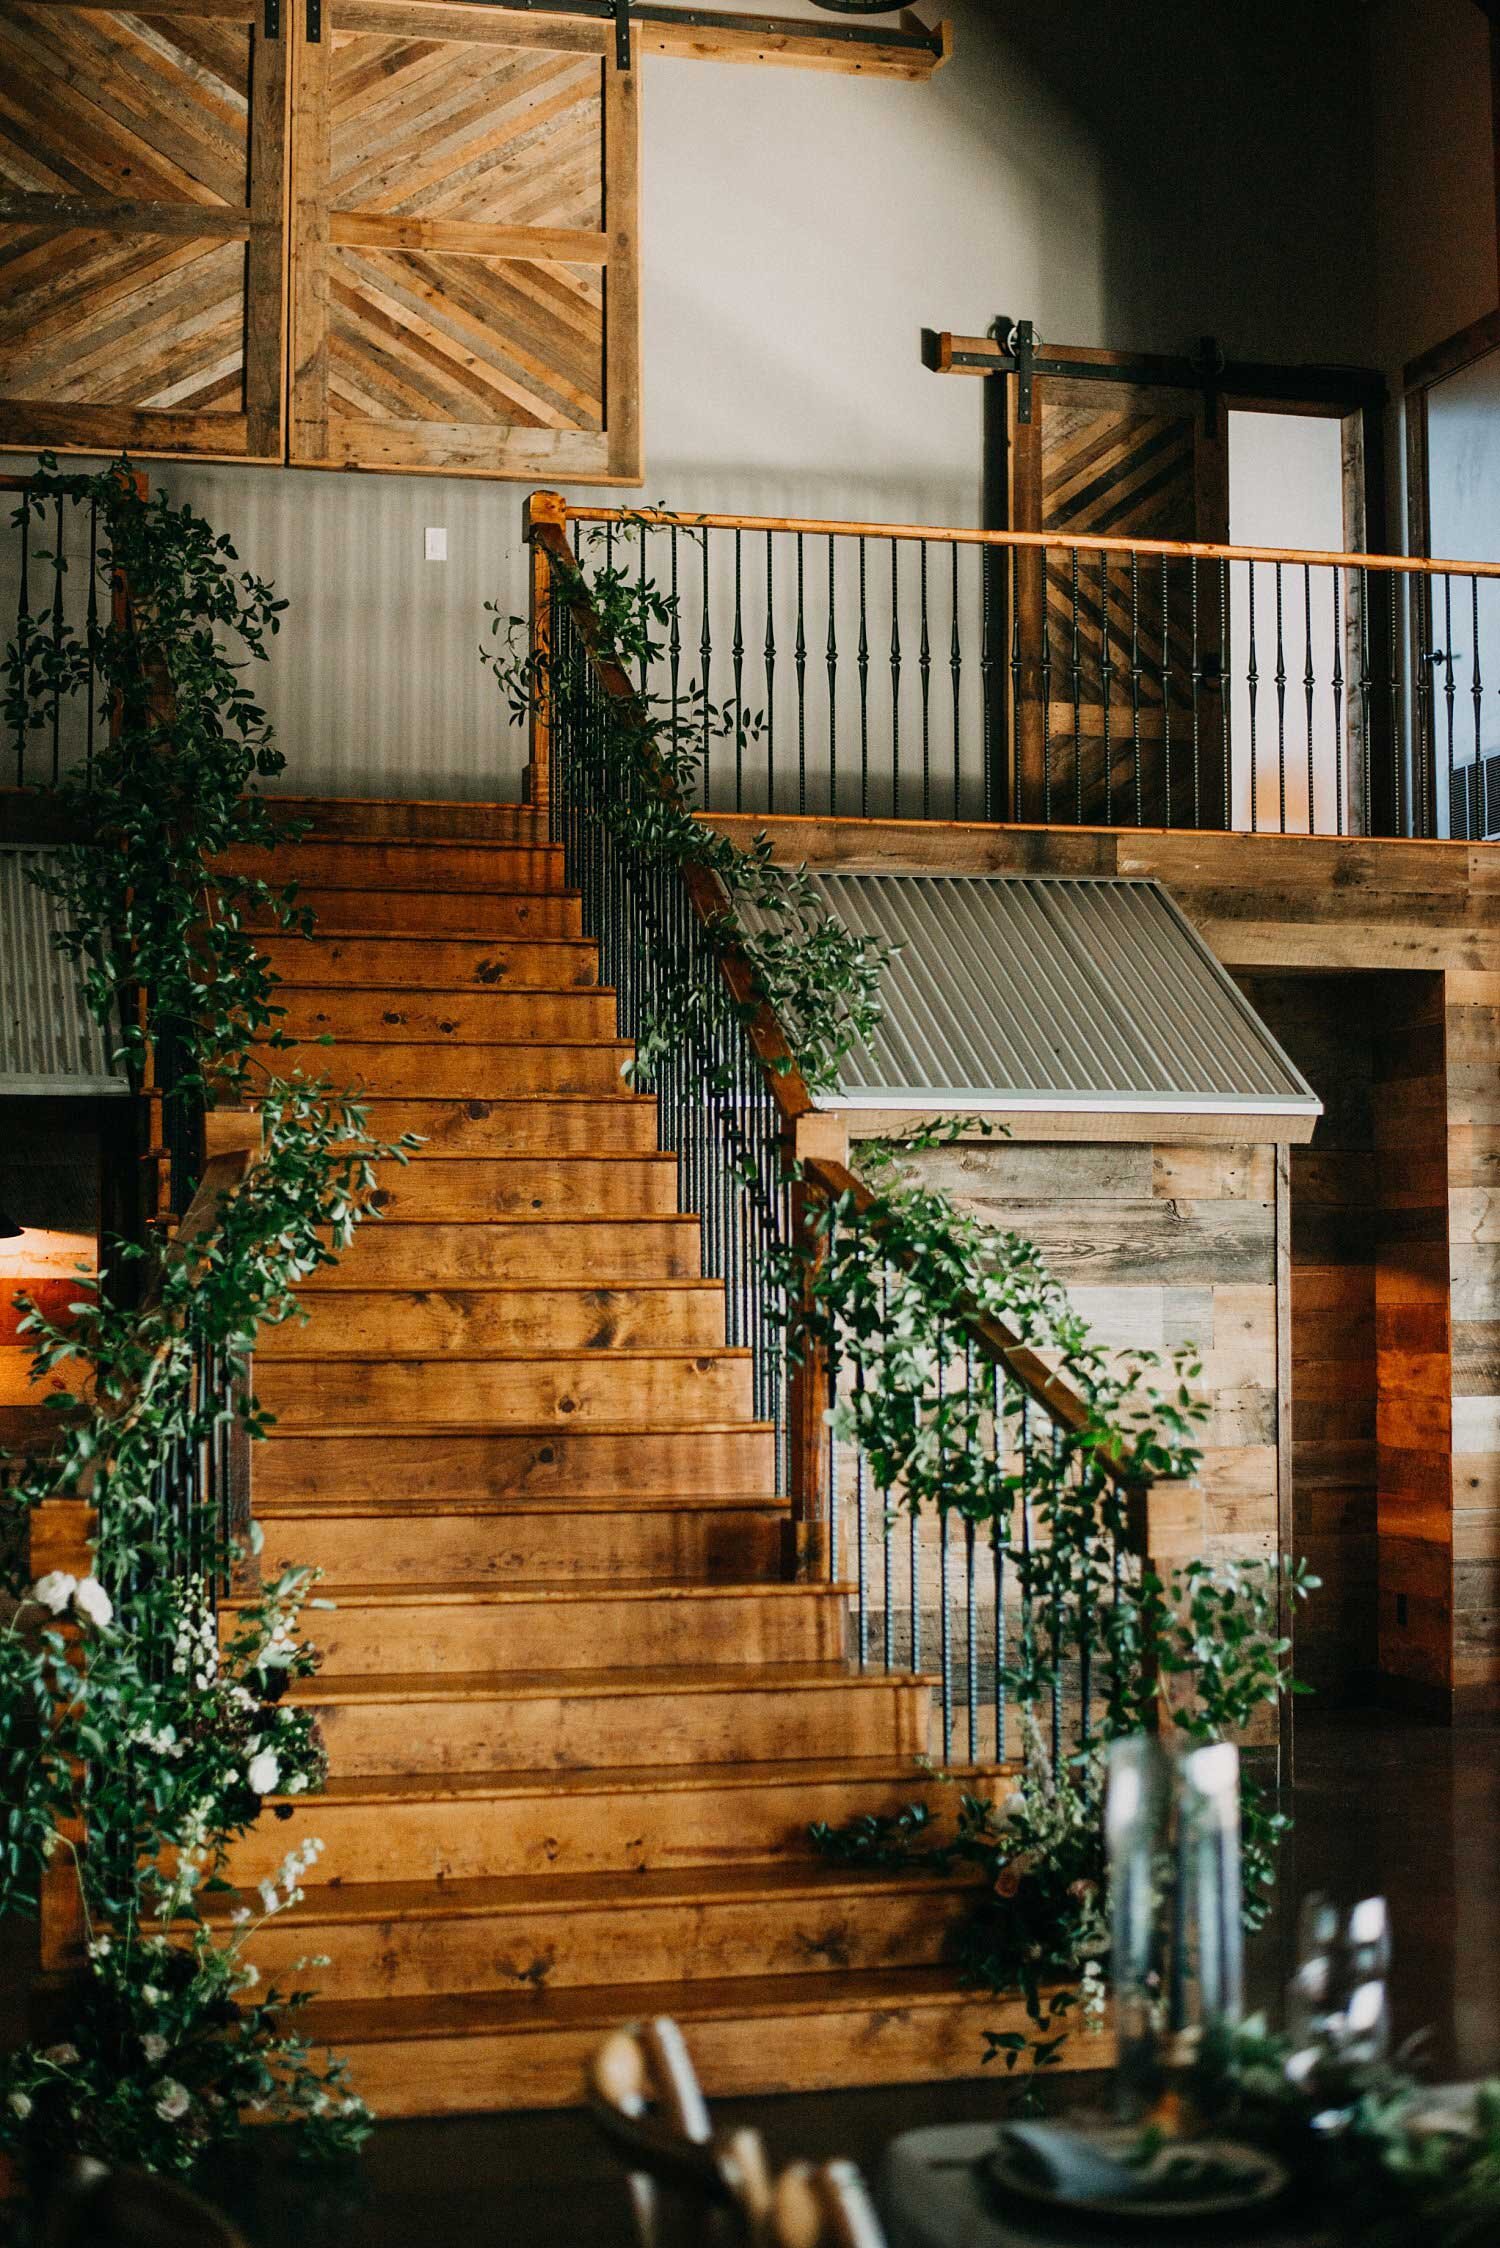 Stair case greenery install at Stone Crest Wedding Venue